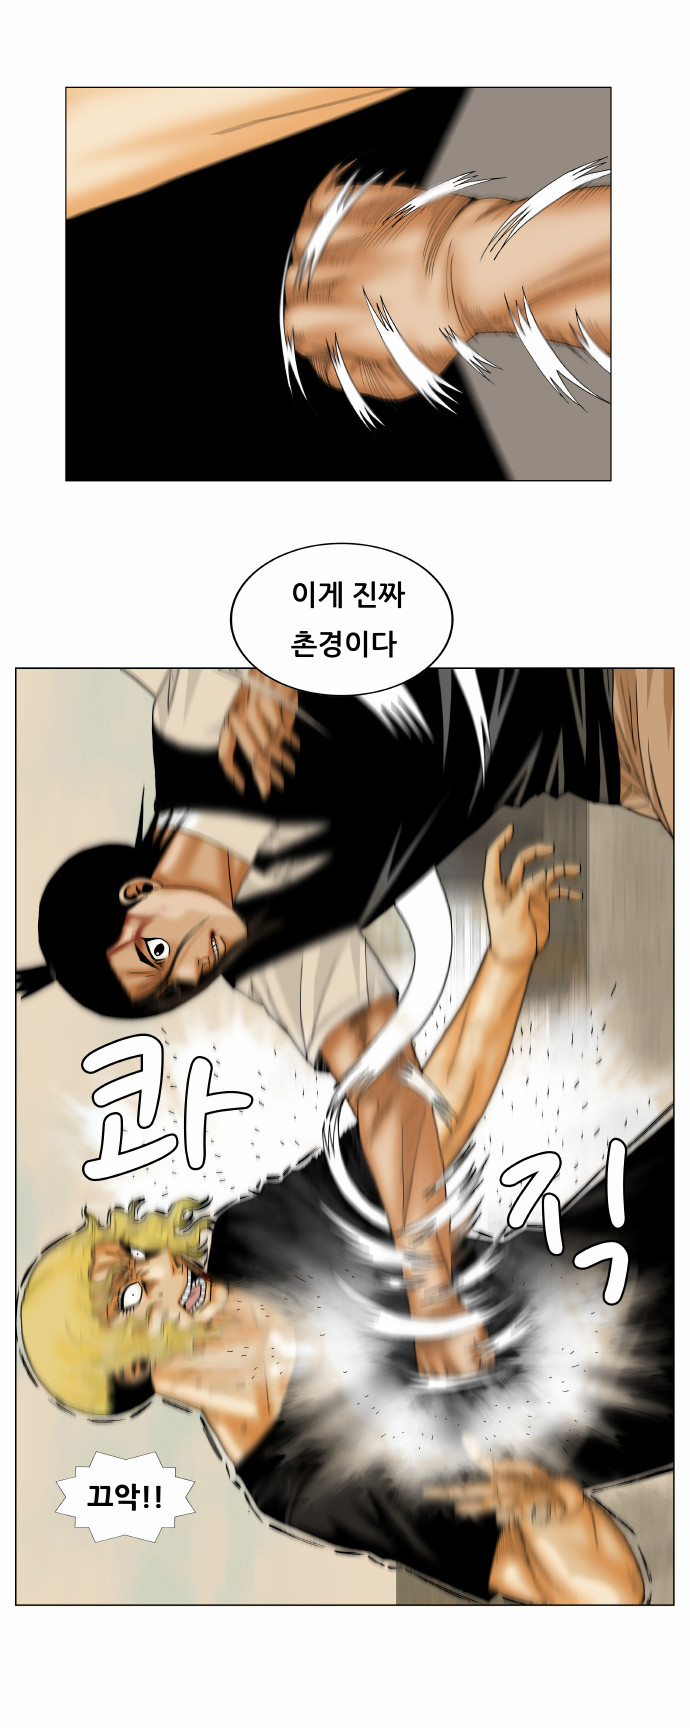 Ultimate Legend - Kang Hae Hyo - Chapter 156 - Page 2